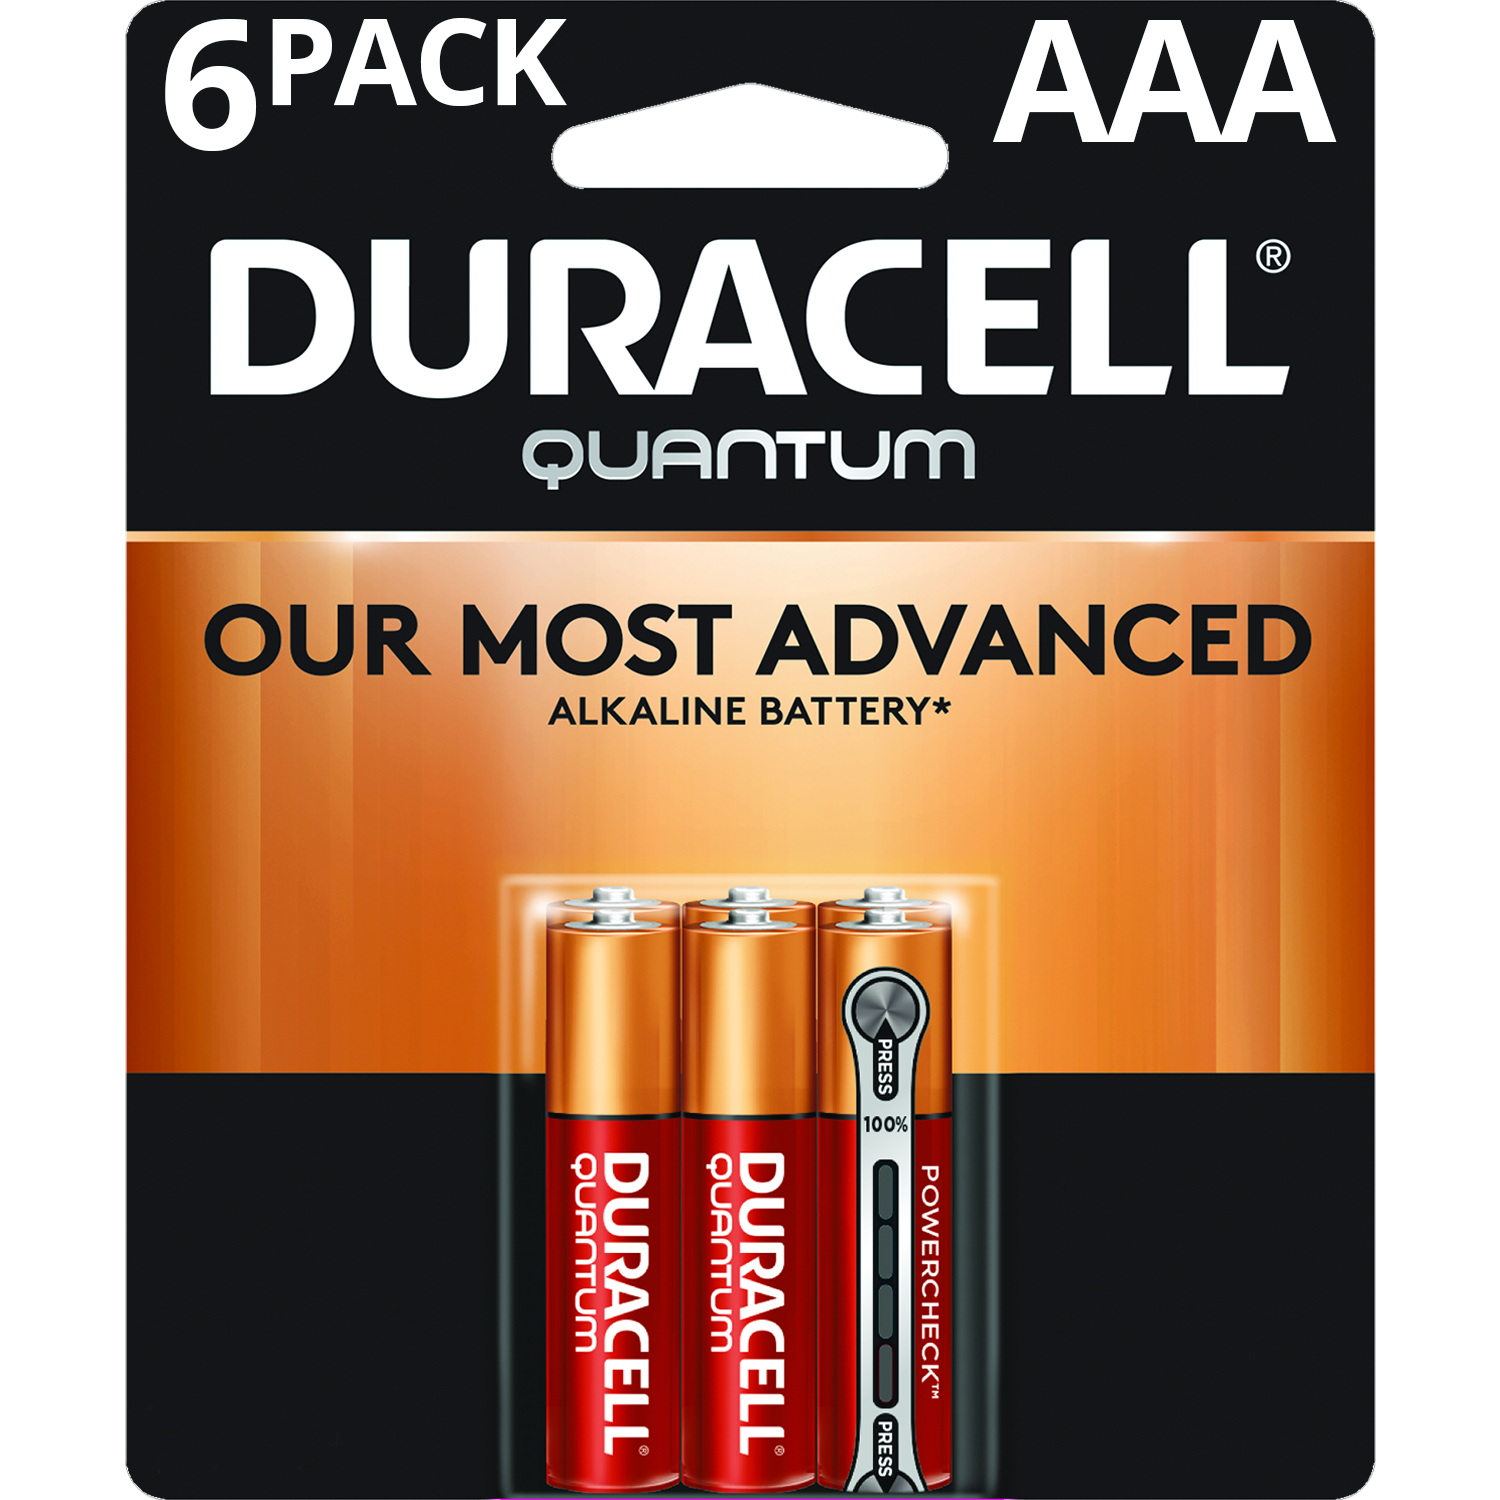 Duracell 1.5V Quantum Alkaline AAA Batteries with PowerCheck, 6 Pack - image 1 of 8